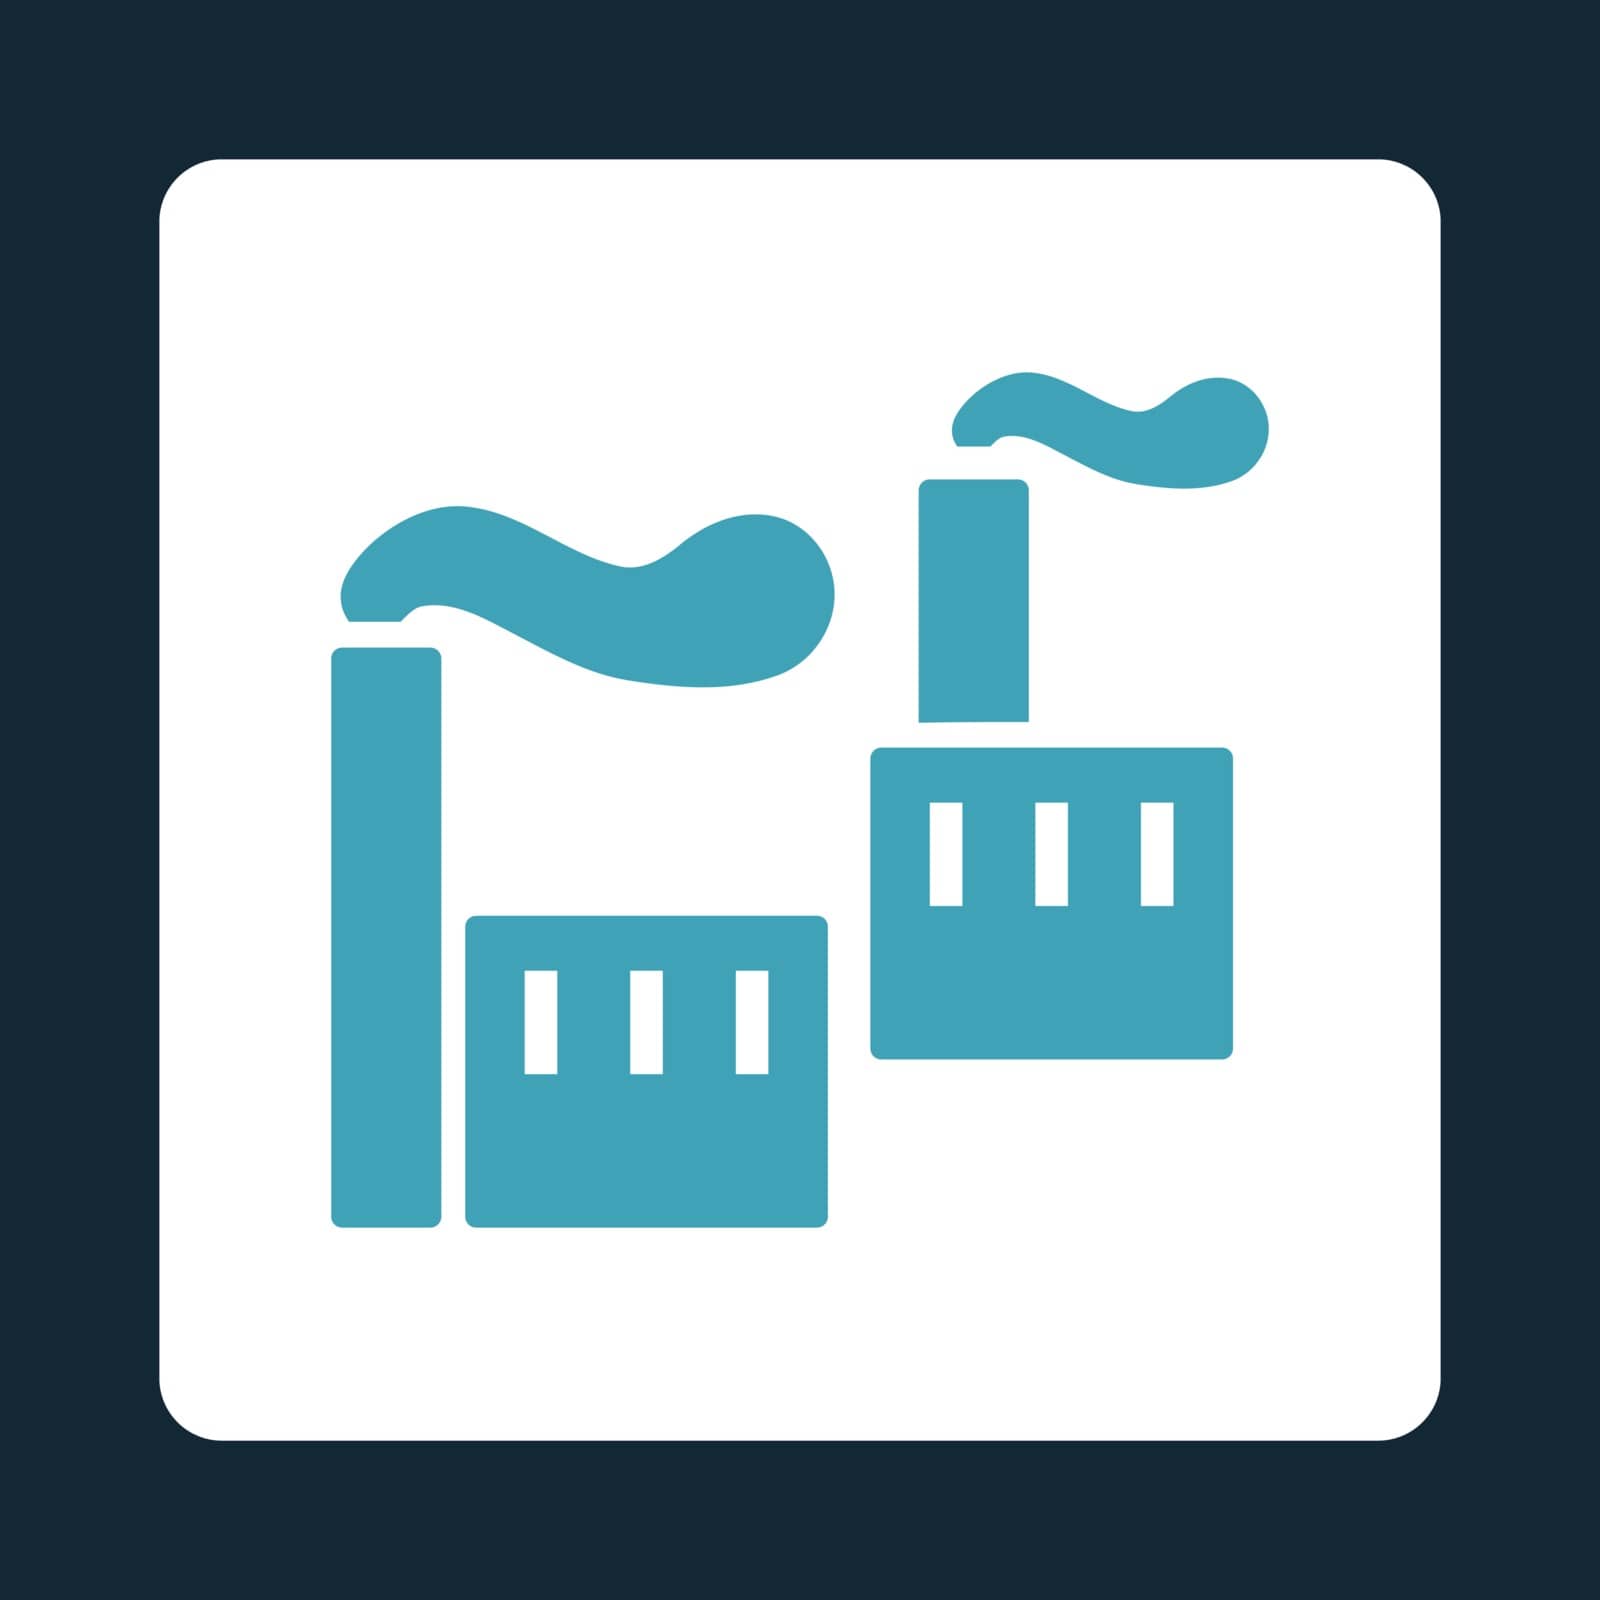 Industry icon. Vector style is blue and white colors, flat rounded square button on a dark blue background.